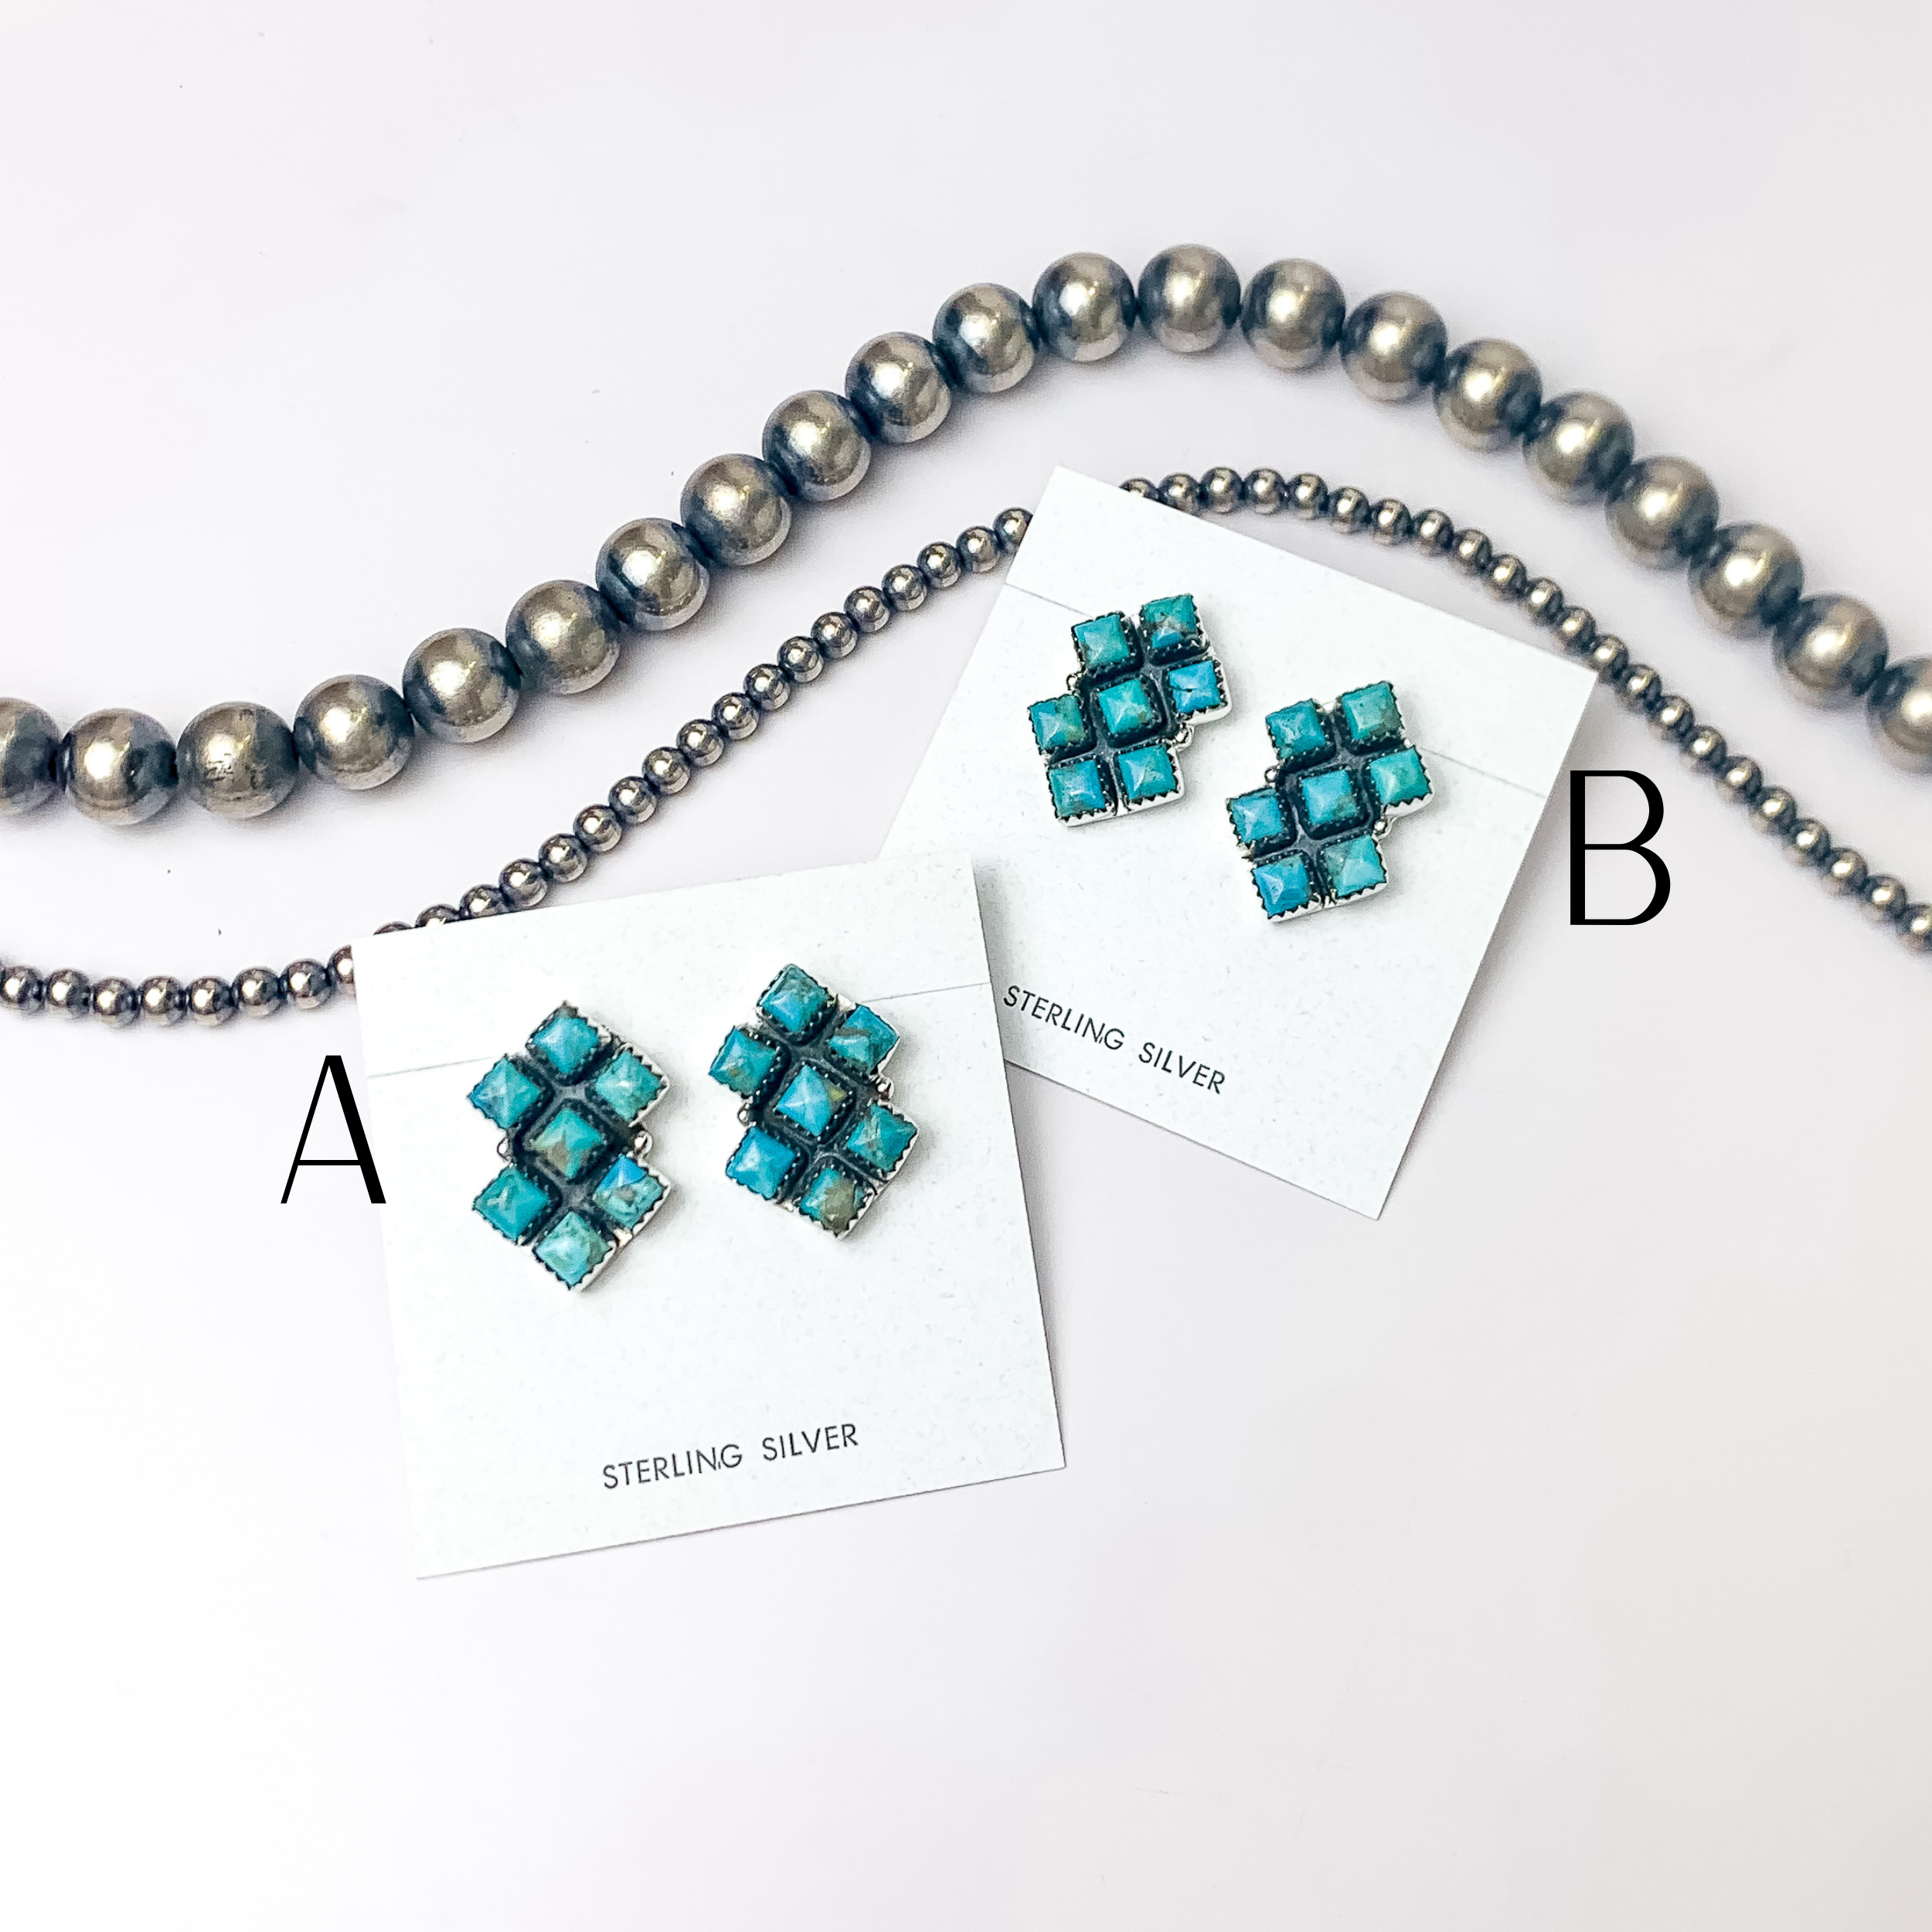 Hada Collection | Handmade Sterling Silver Square Cluster Stud Earrings with Kingman Turquoise Remix Stones - Giddy Up Glamour Boutique